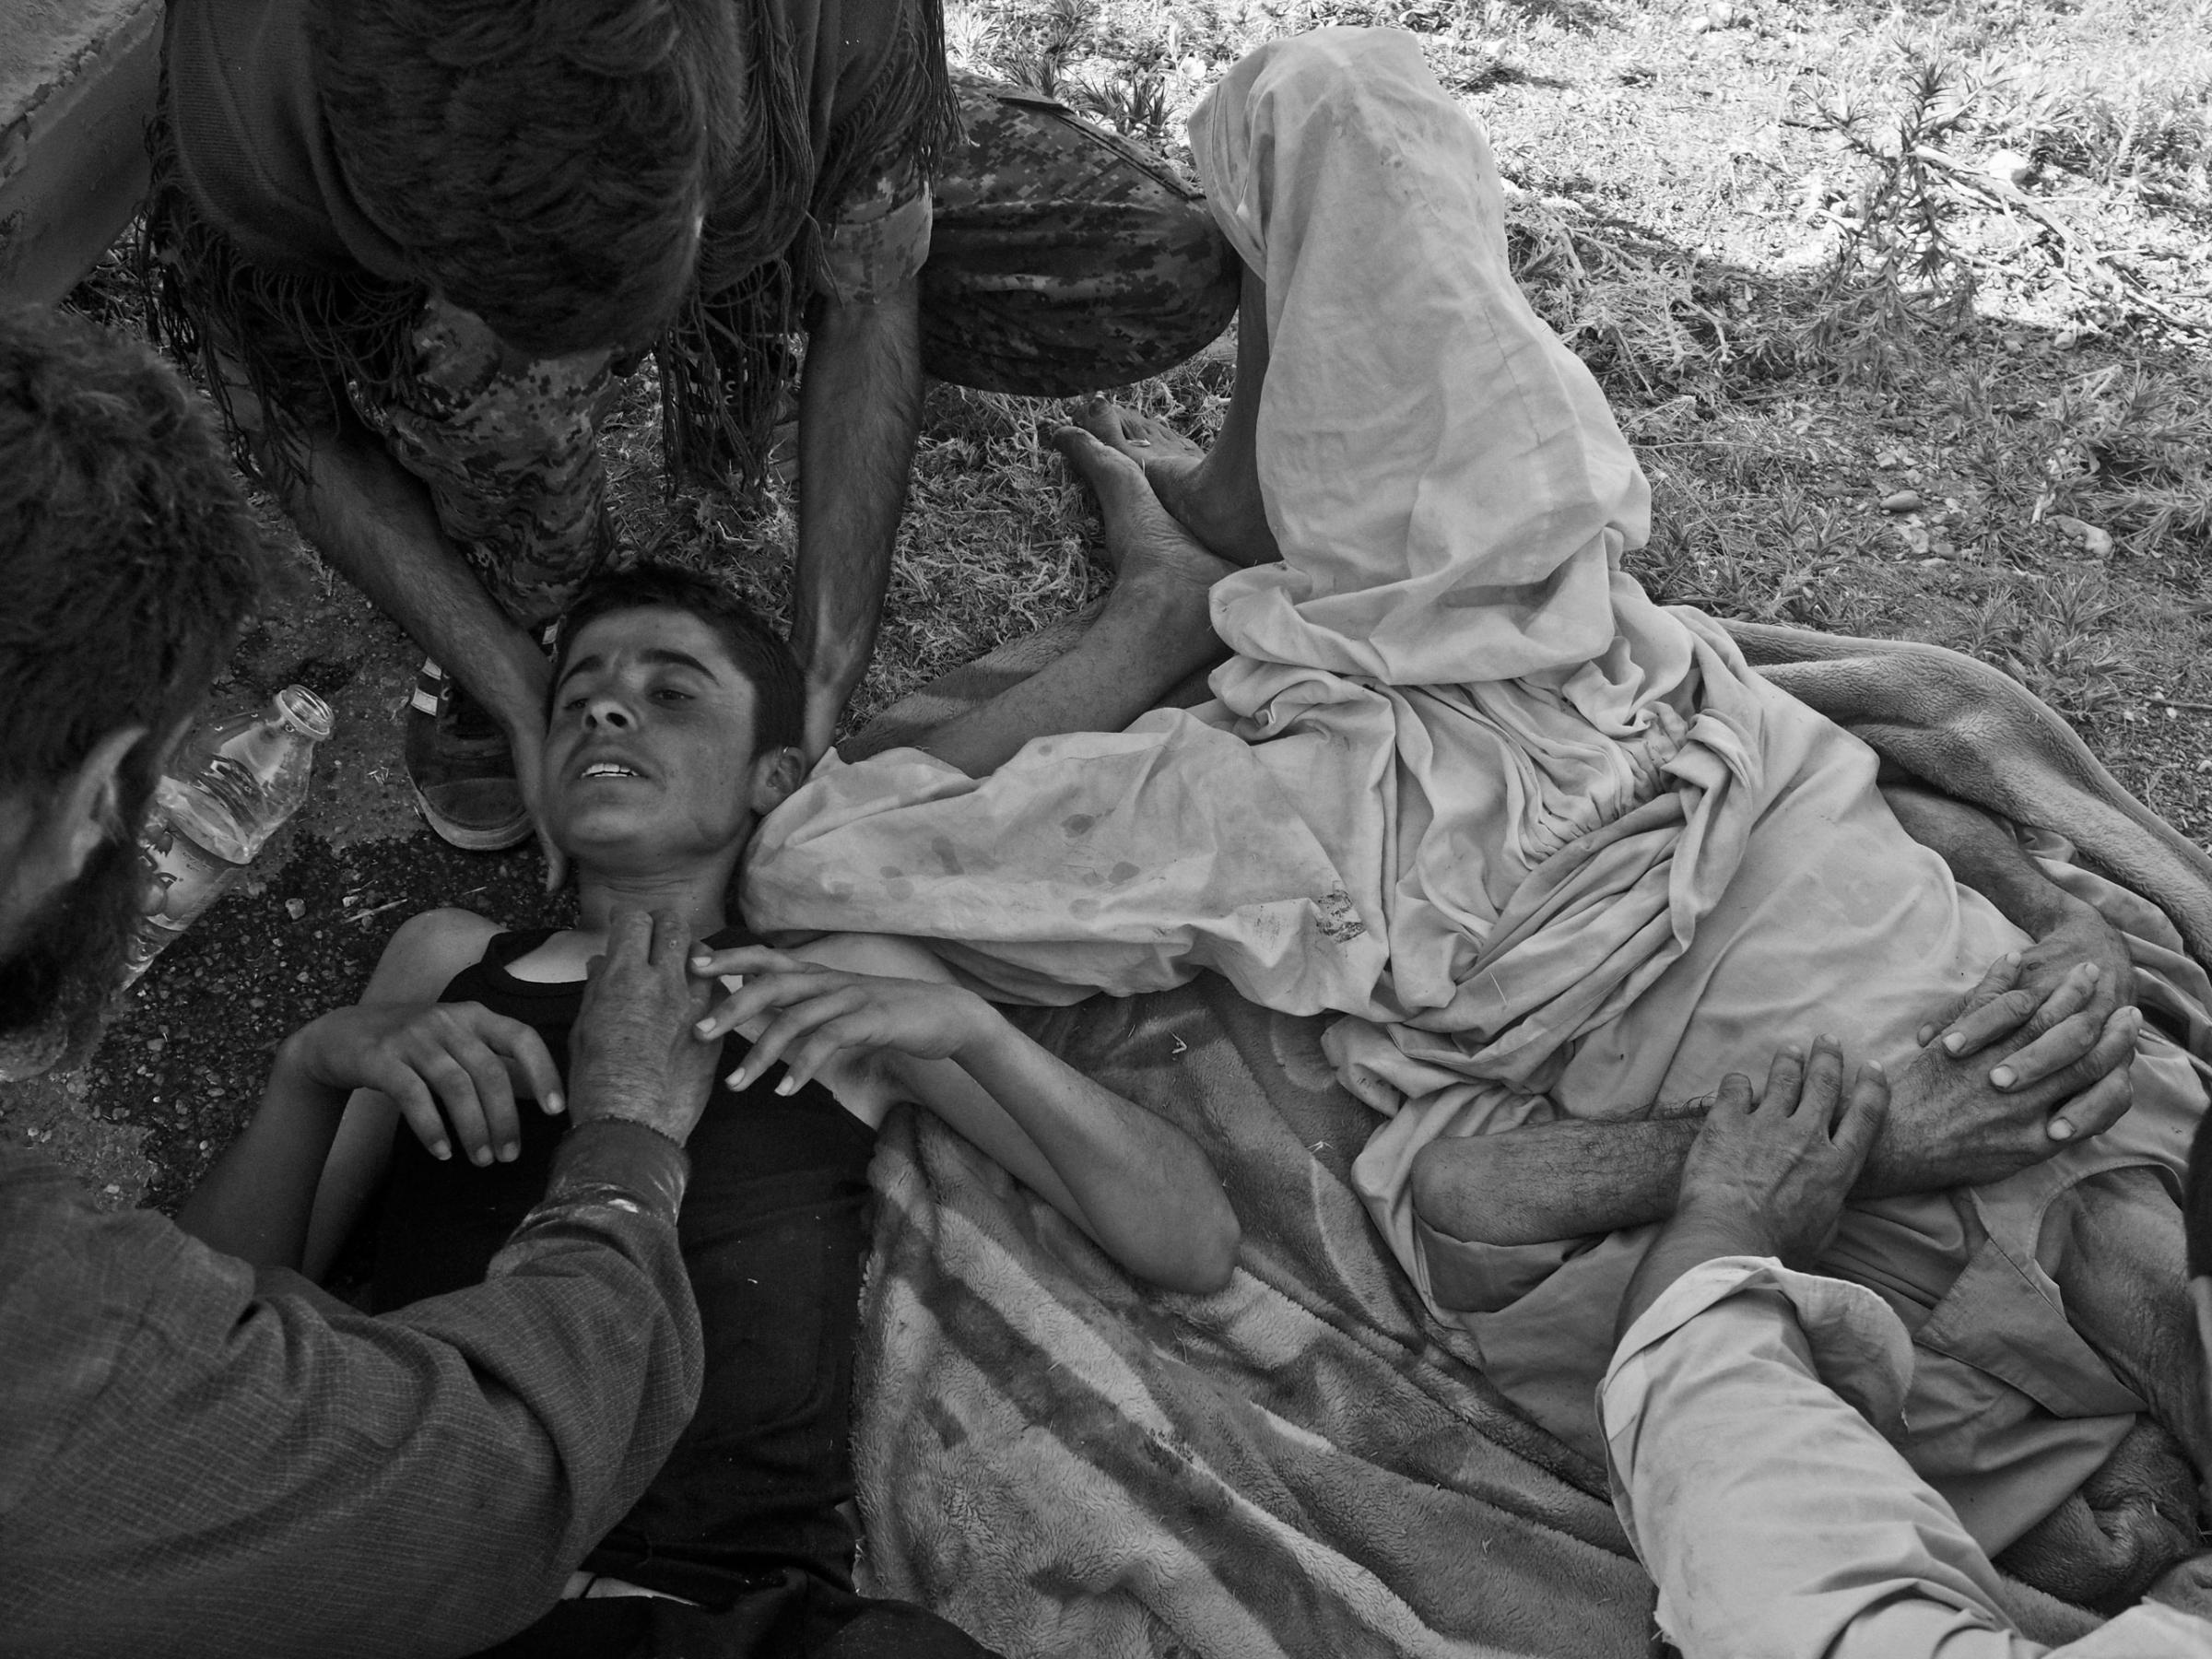 Wounded Yezidi refugees receive care after a helicopter crash. Sinjar Mountains, Iraq. Aug. 12, 2014.